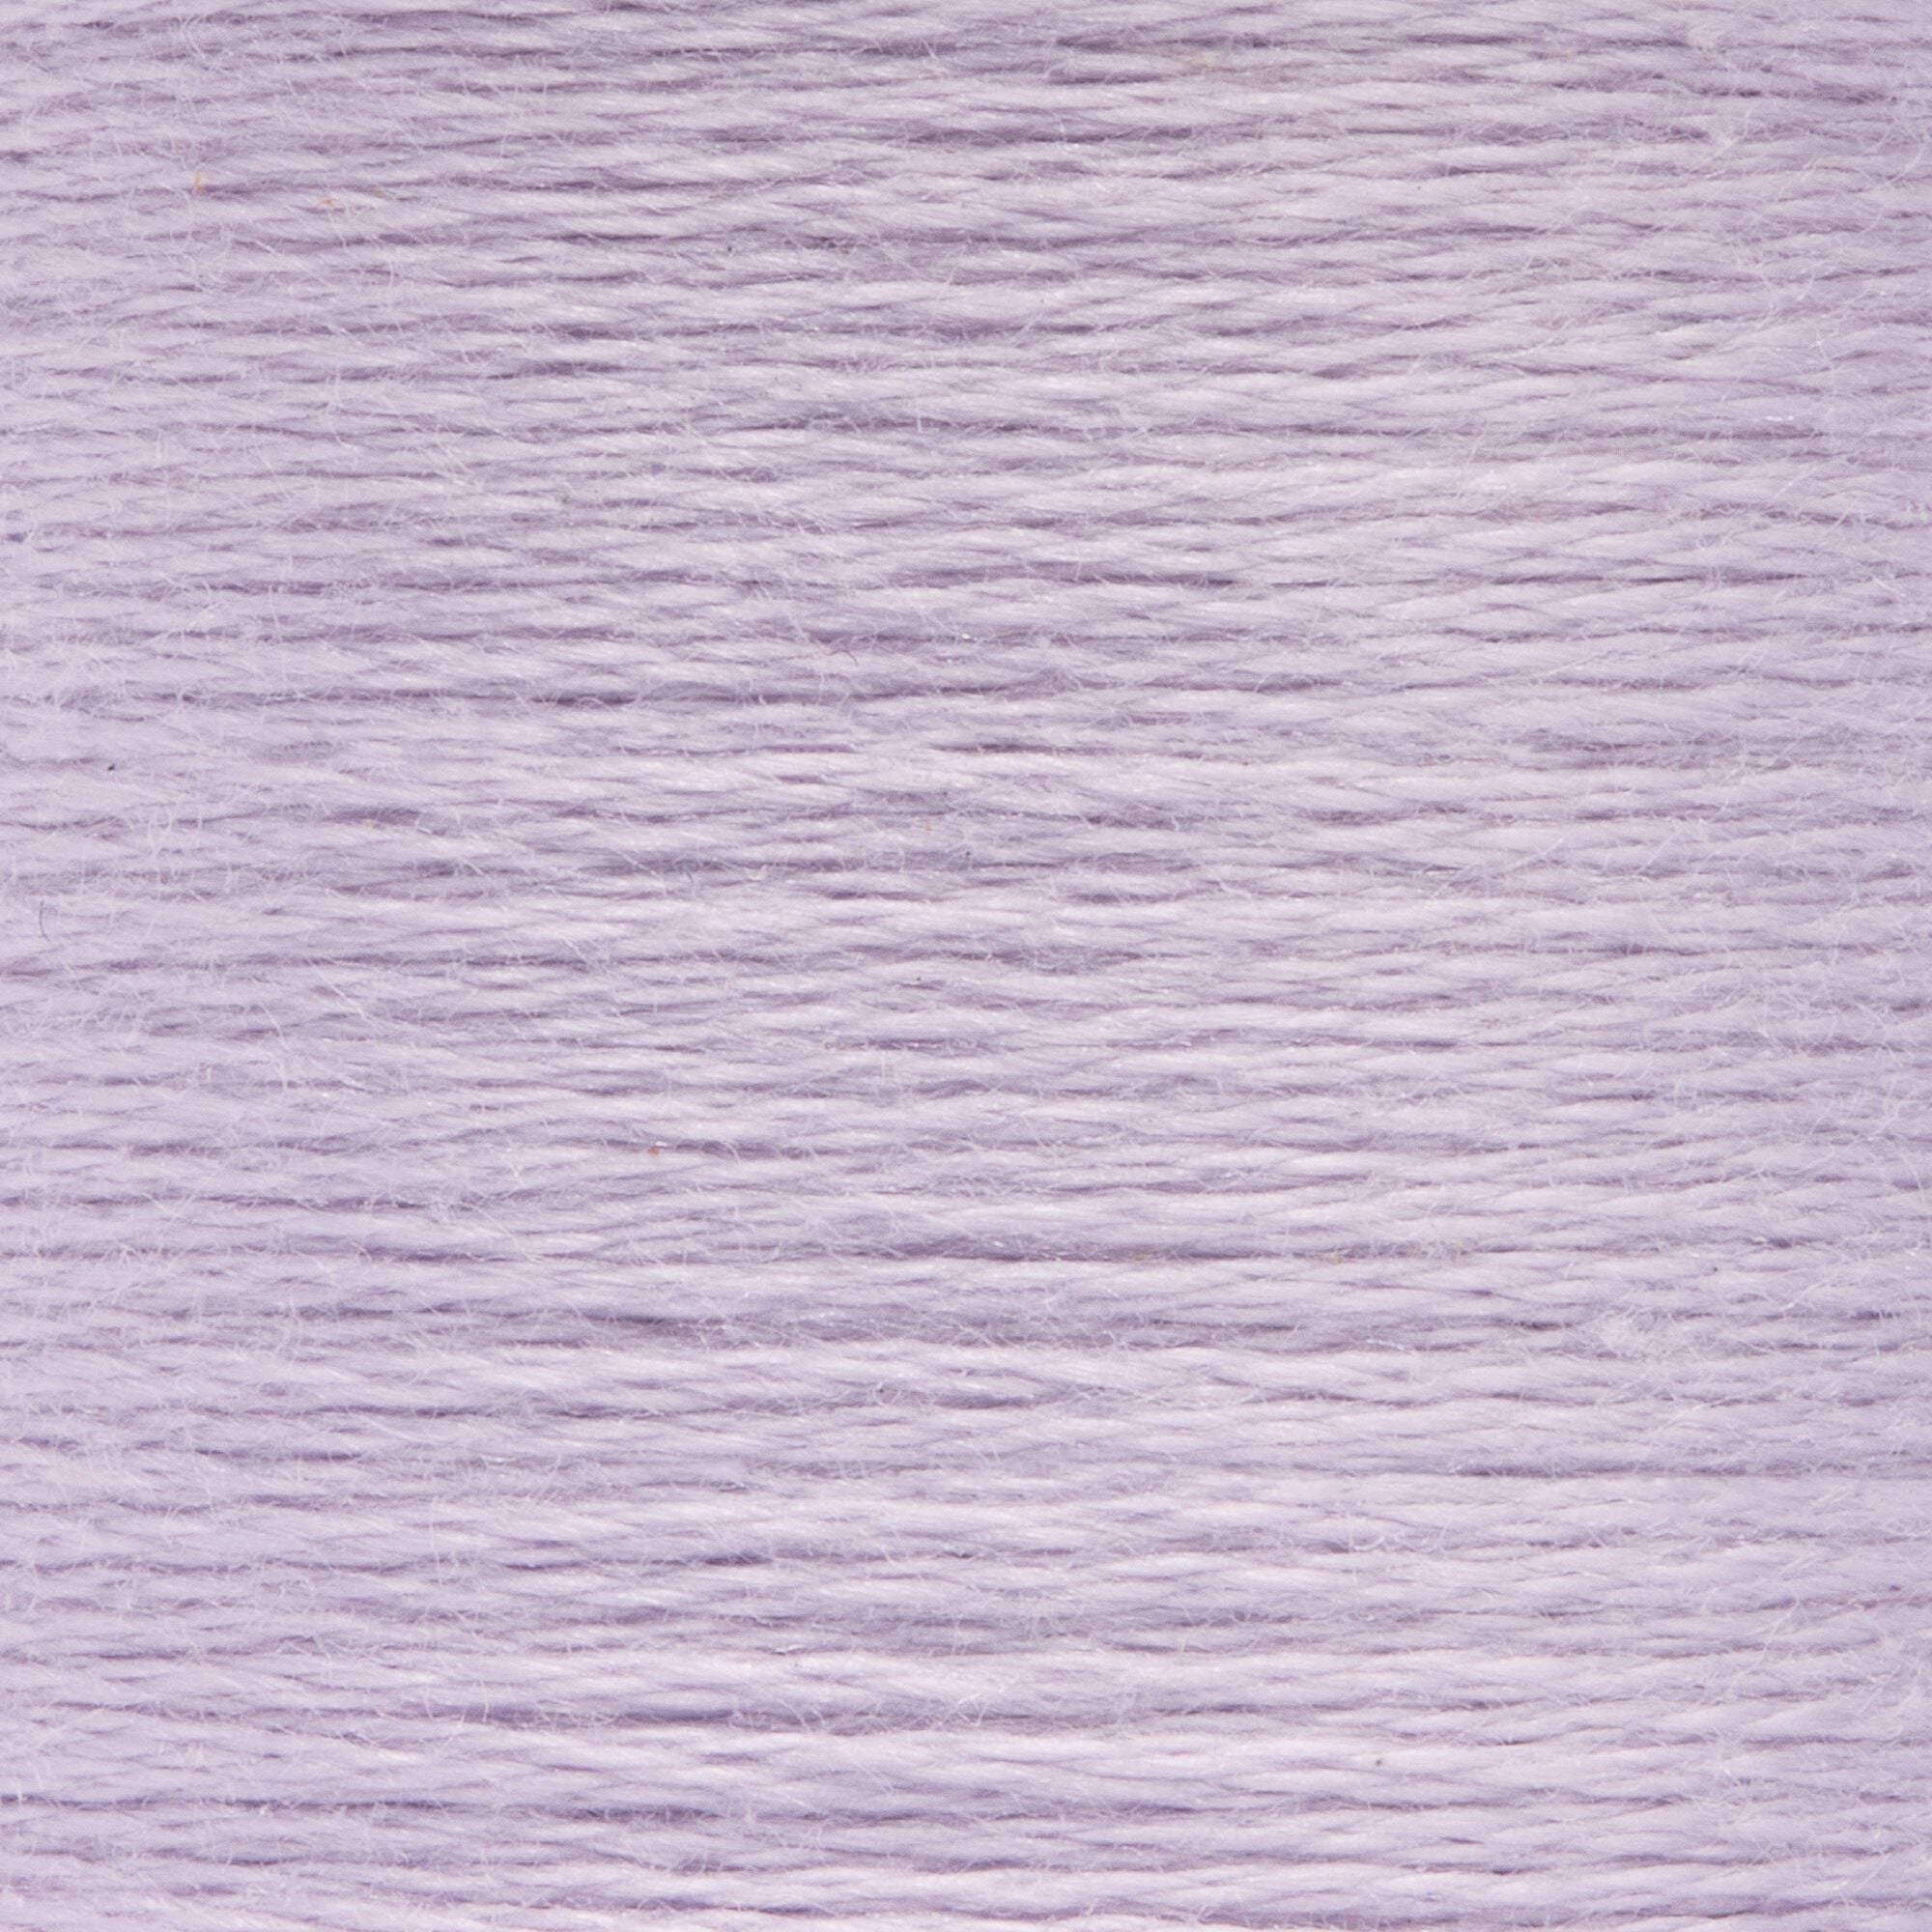 Anchor Embroidery Floss in Lilac Lt